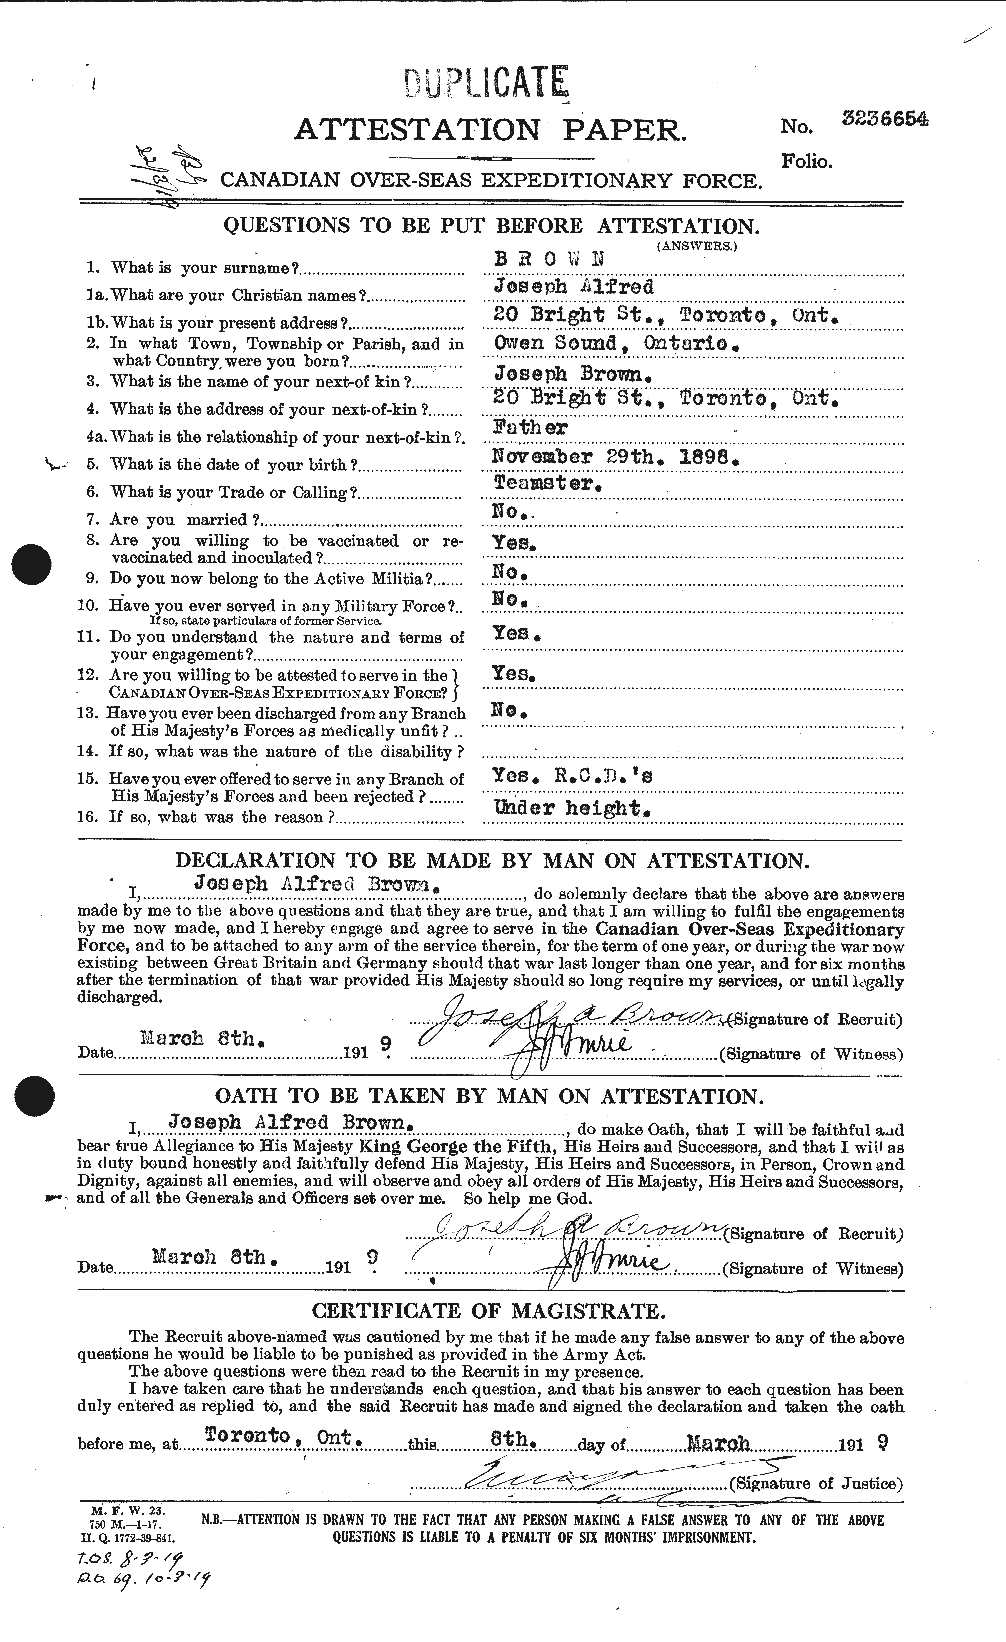 Personnel Records of the First World War - CEF 265955a